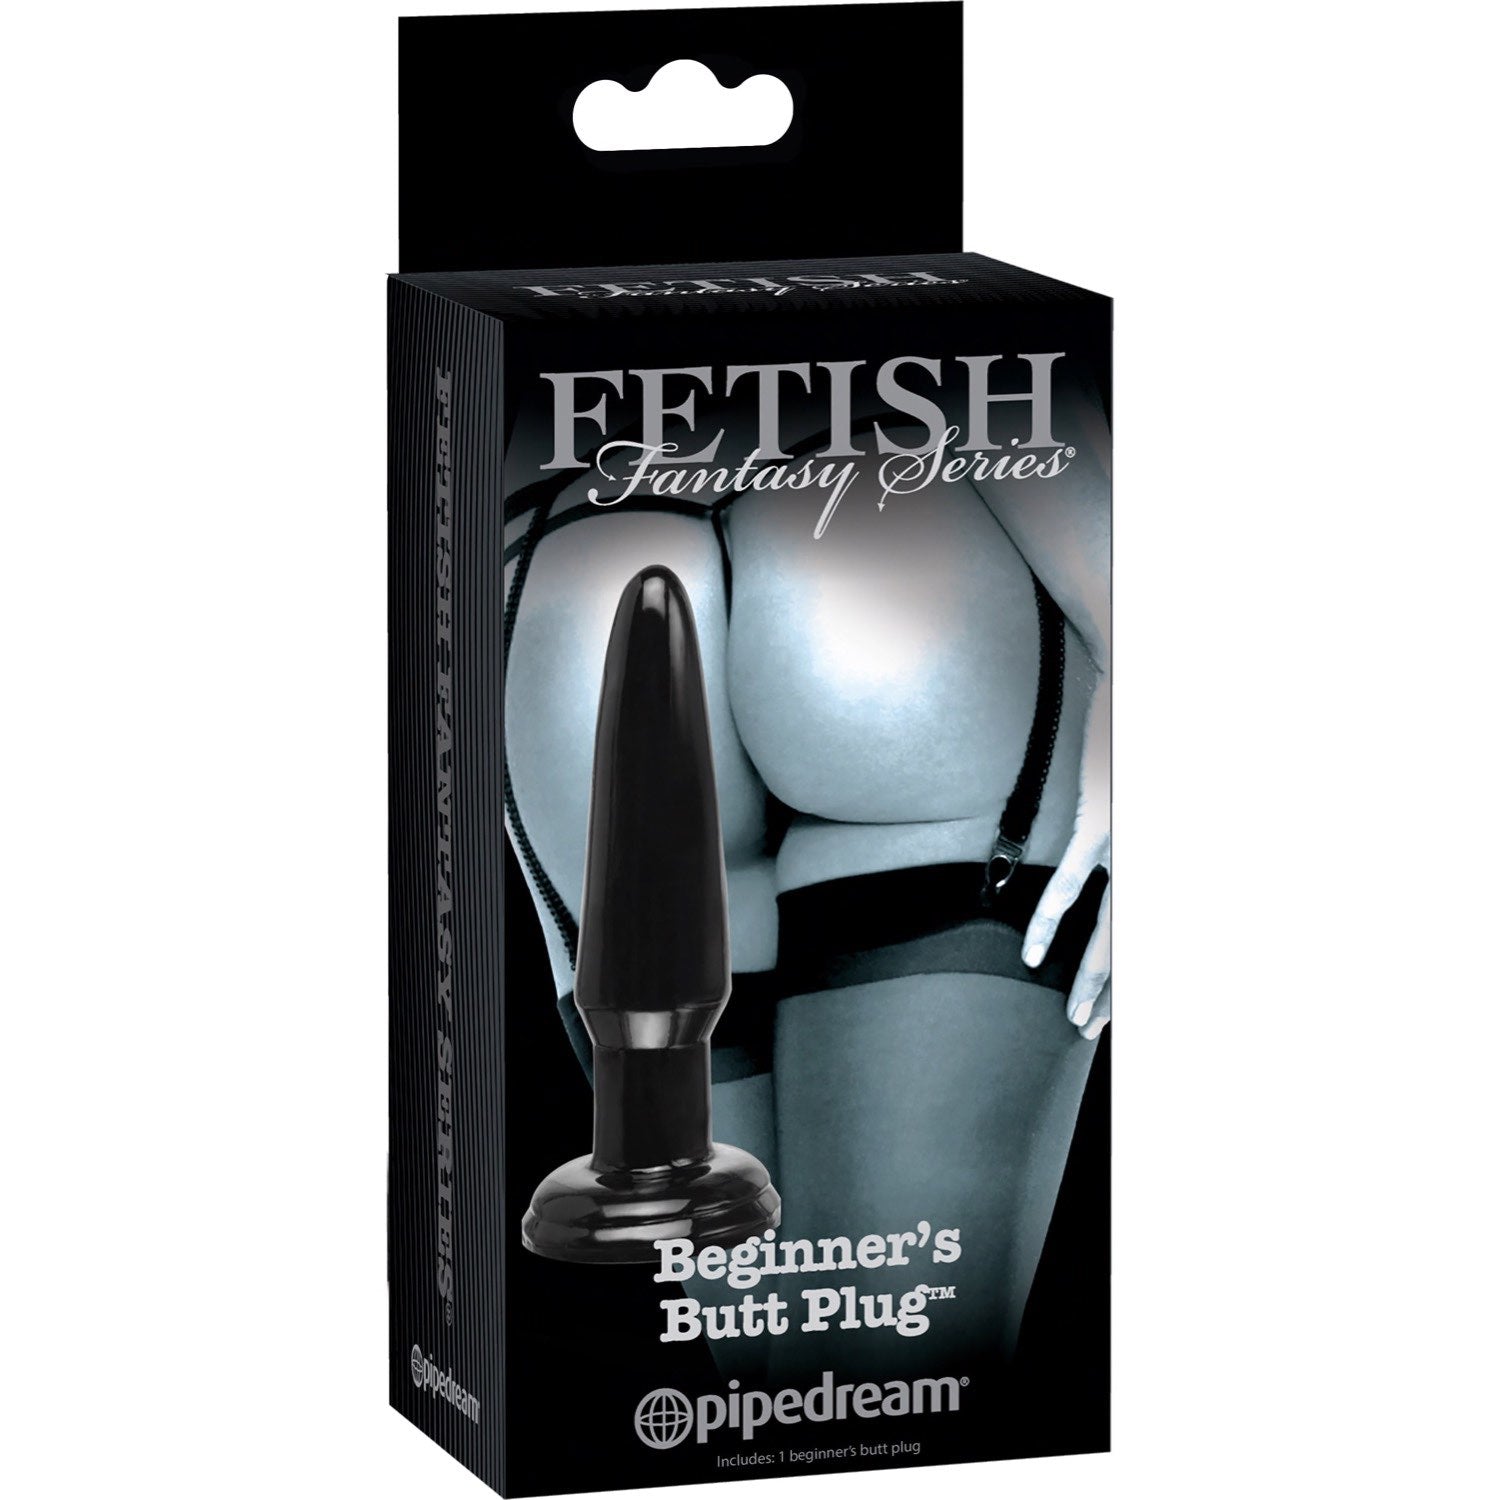 Fetish Fantasy Series Limited Edition Beginner&#39;s Butt Plug - Black 9.5 cm (3.75&quot;) Butt Plug by Pipedream